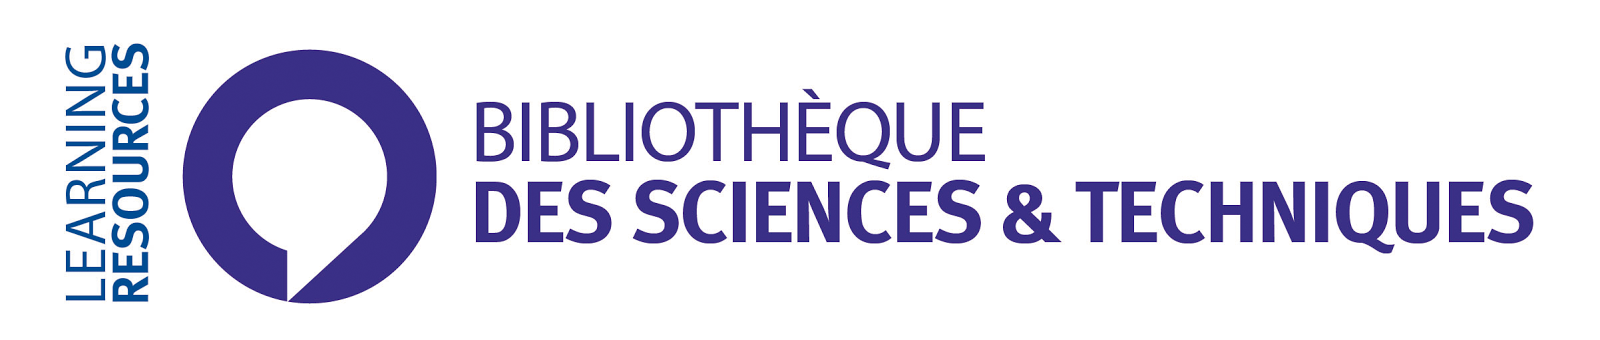 http://www.bib.ulb.ac.be/fr/bibliotheques/bibliotheque-des-sciences-et-techniques/index.html